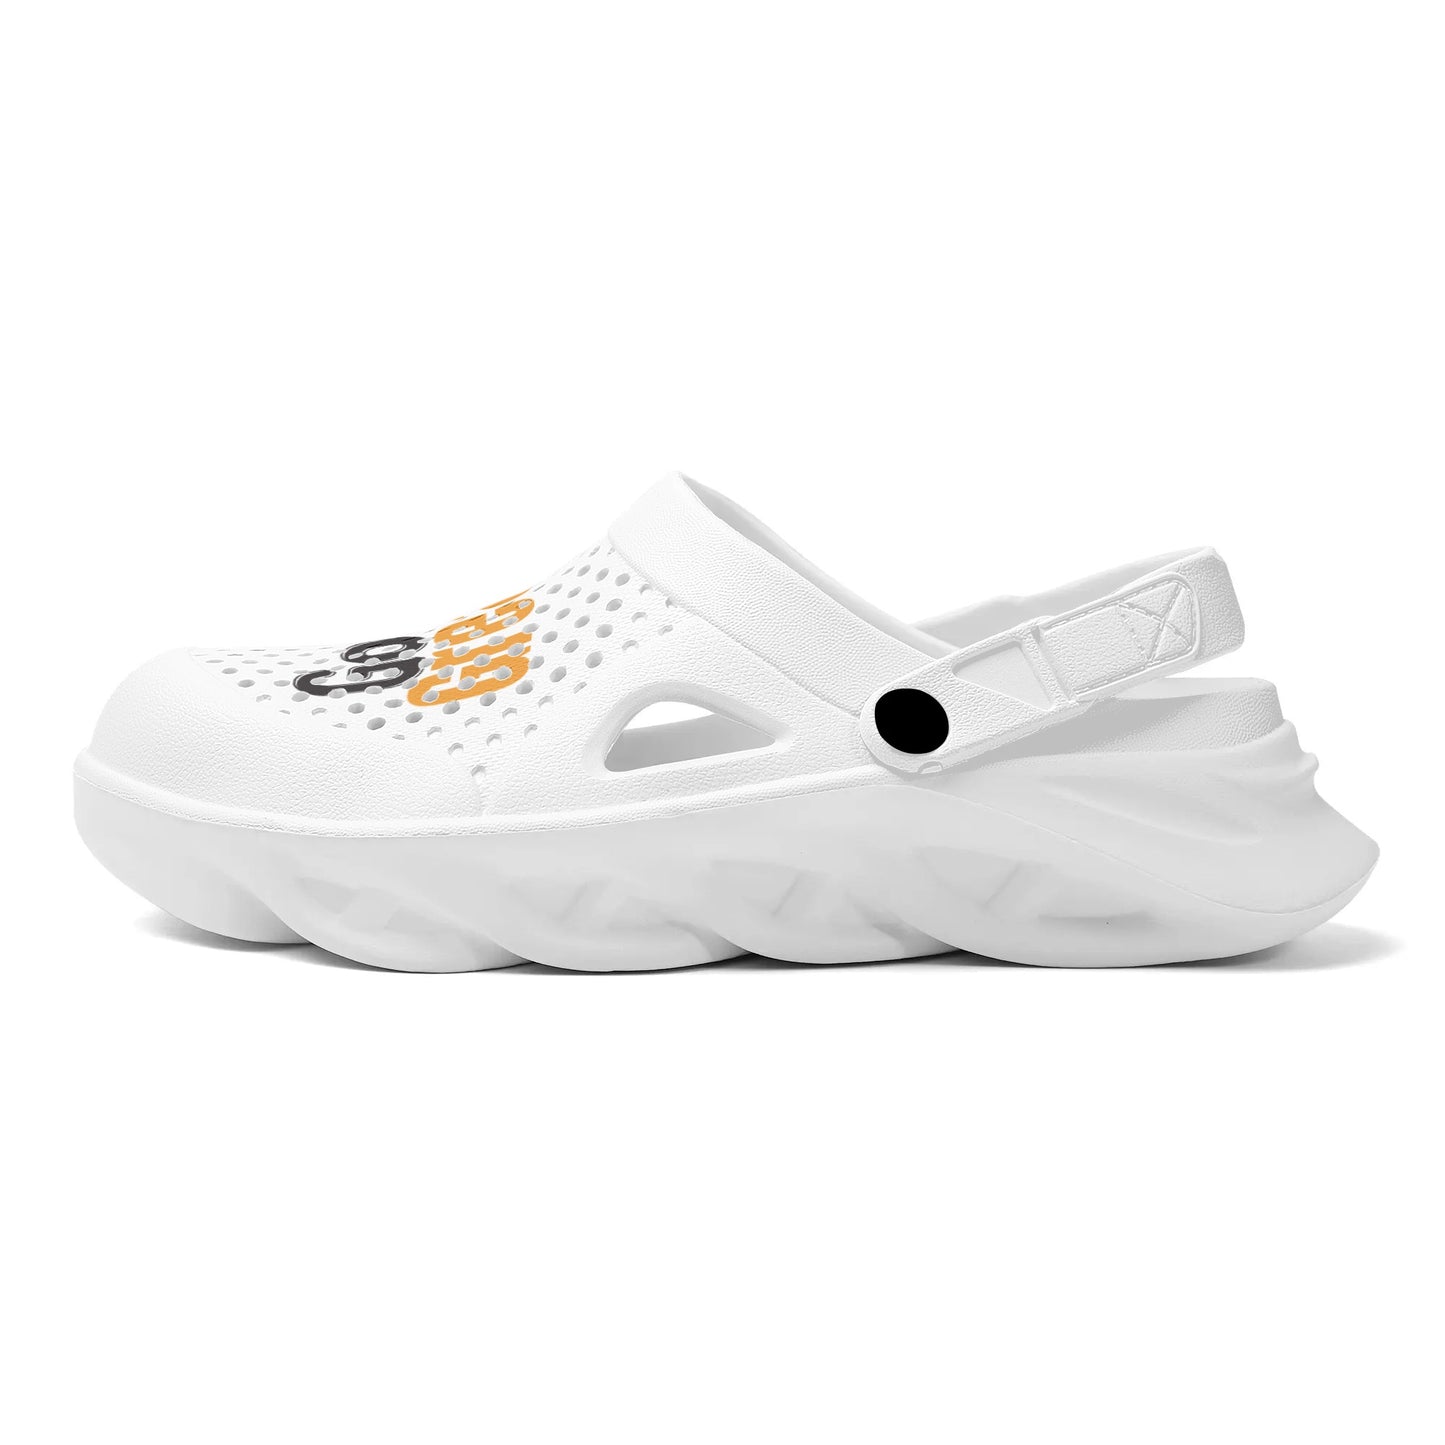 God Is Greater Outcomes Womens Lightweight EVA Summer Beach Hollow Out Christian Crocs popcustoms